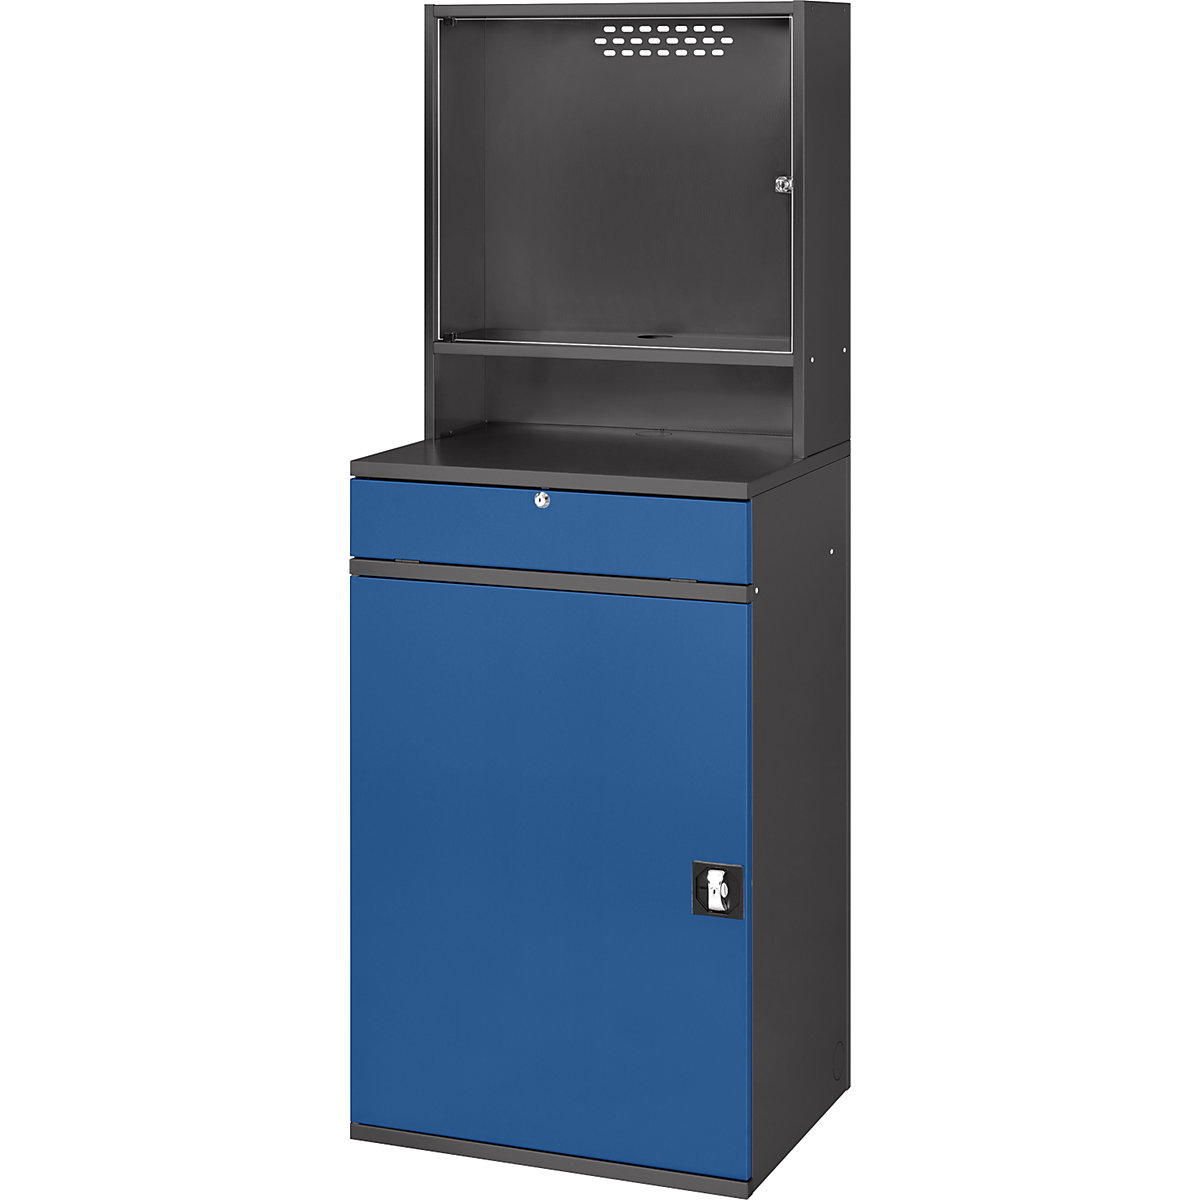 RAU – Computer workstation, monitor housing, 1 pull-out shelf, 2 drawers, width 650 mm, charcoal / gentian blue